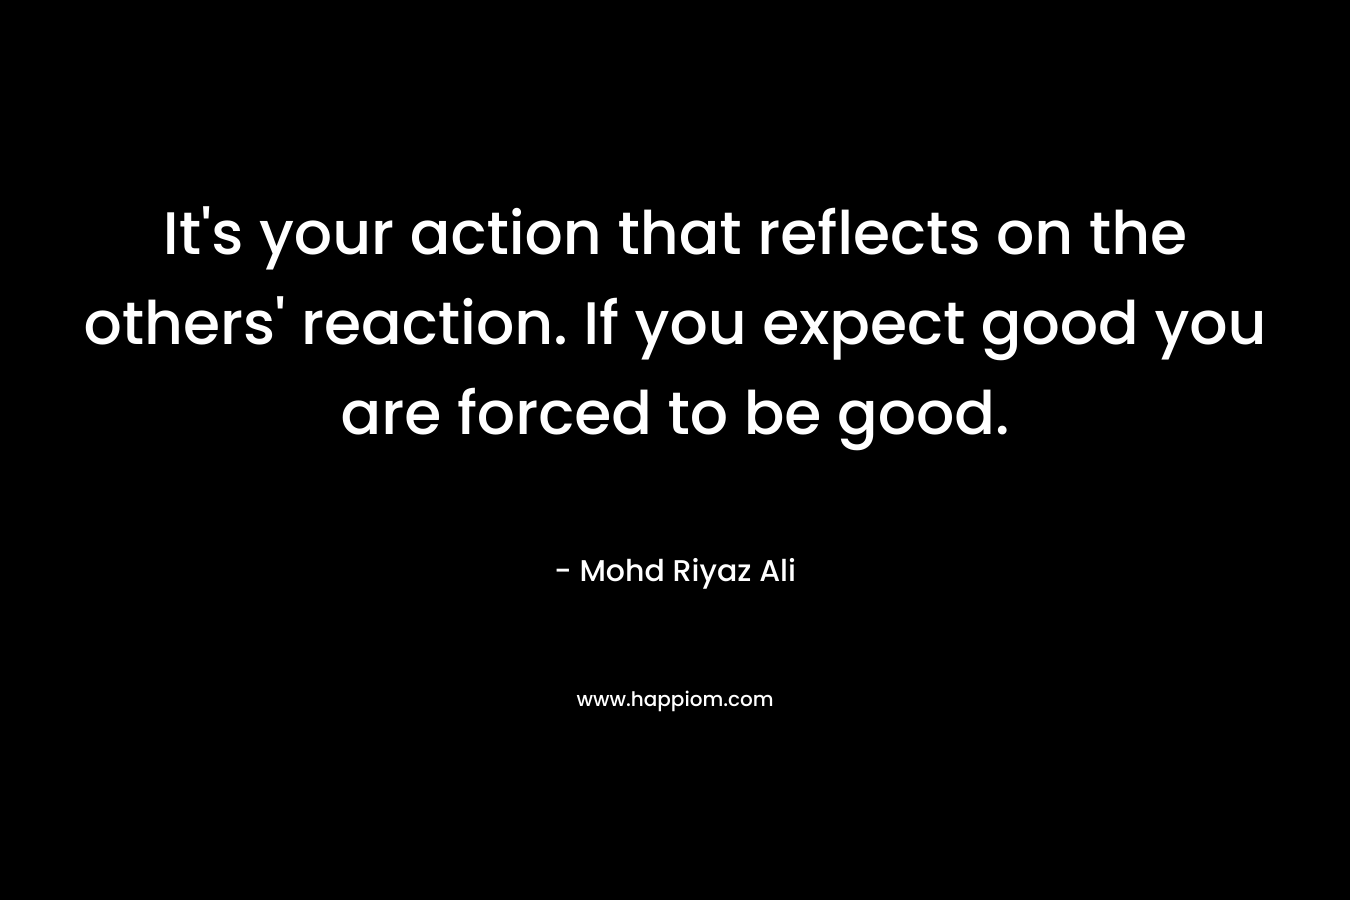 It's your action that reflects on the others' reaction. If you expect good you are forced to be good.